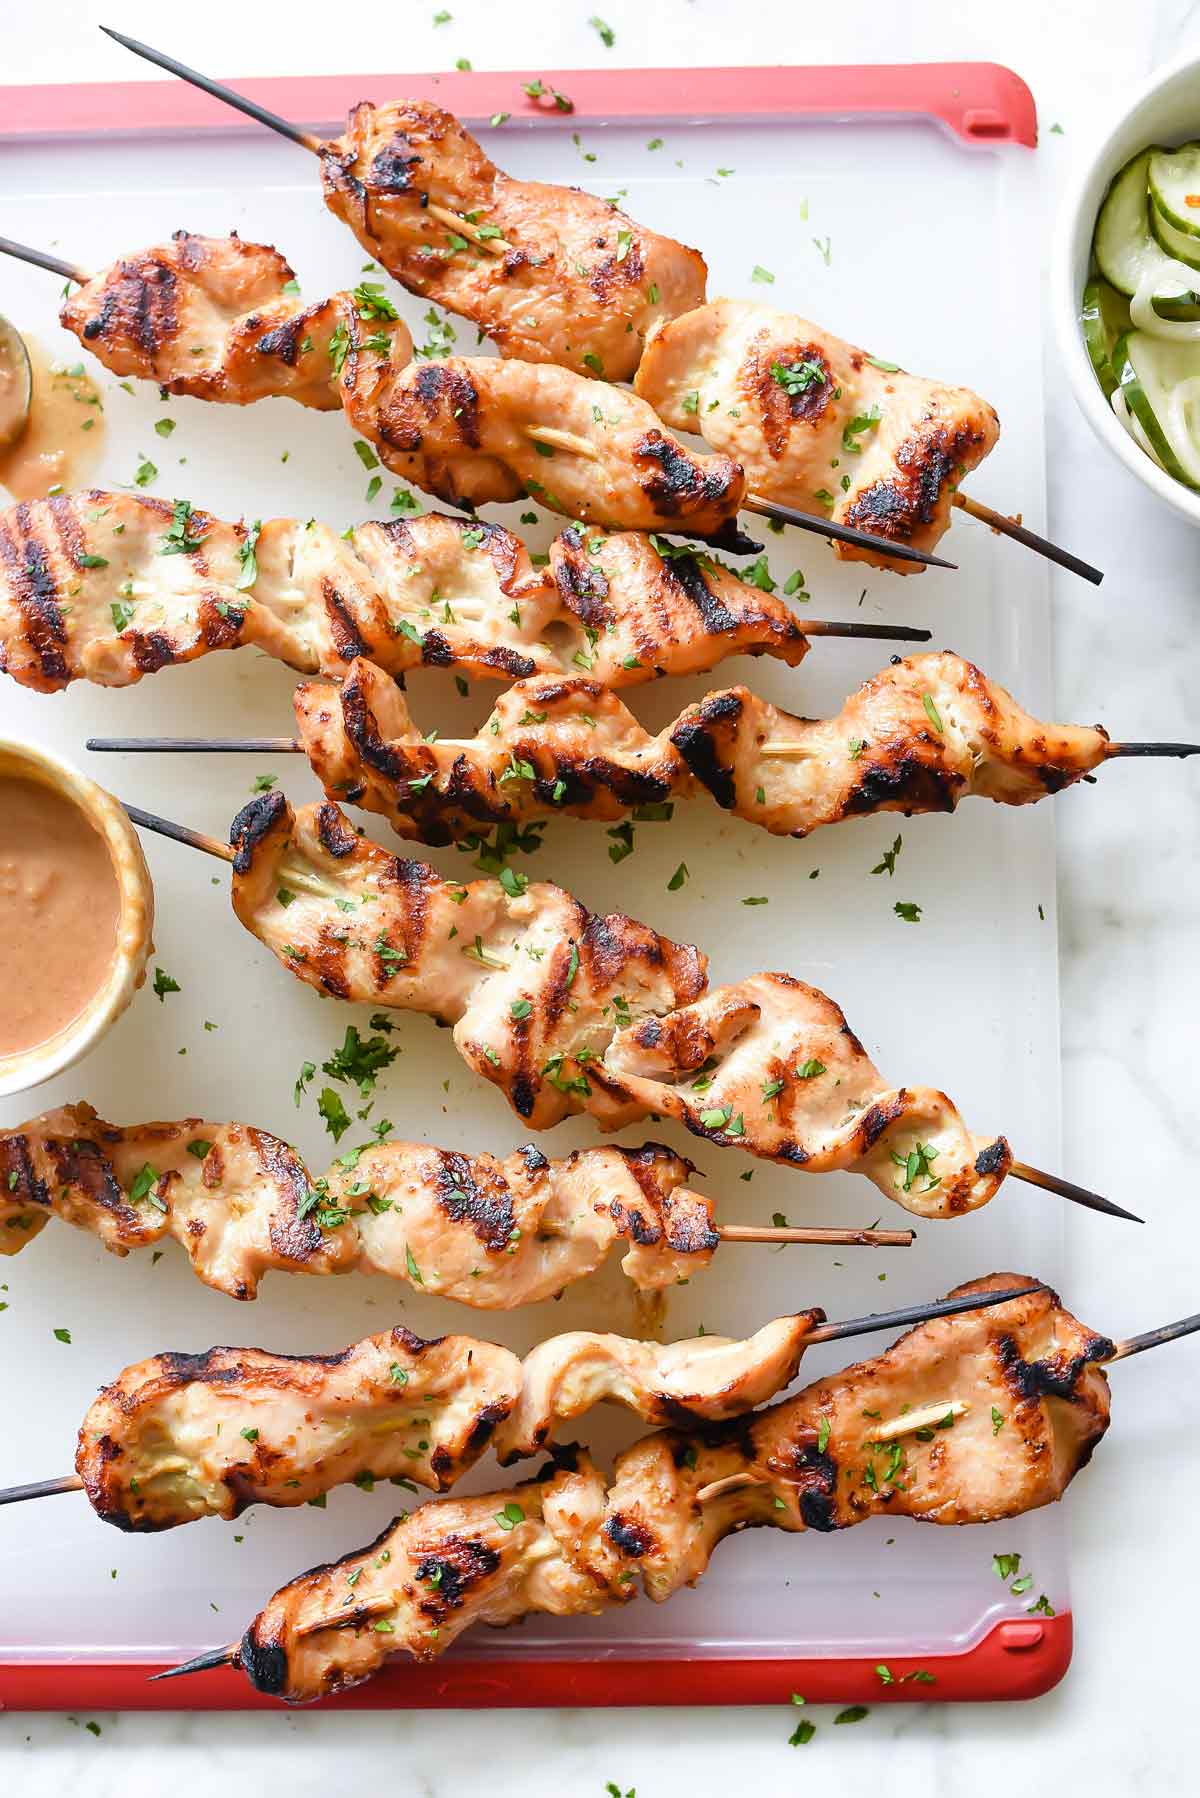 Chicken Satay with Lighter Almond Dipping Sauce | foodiecrush.com